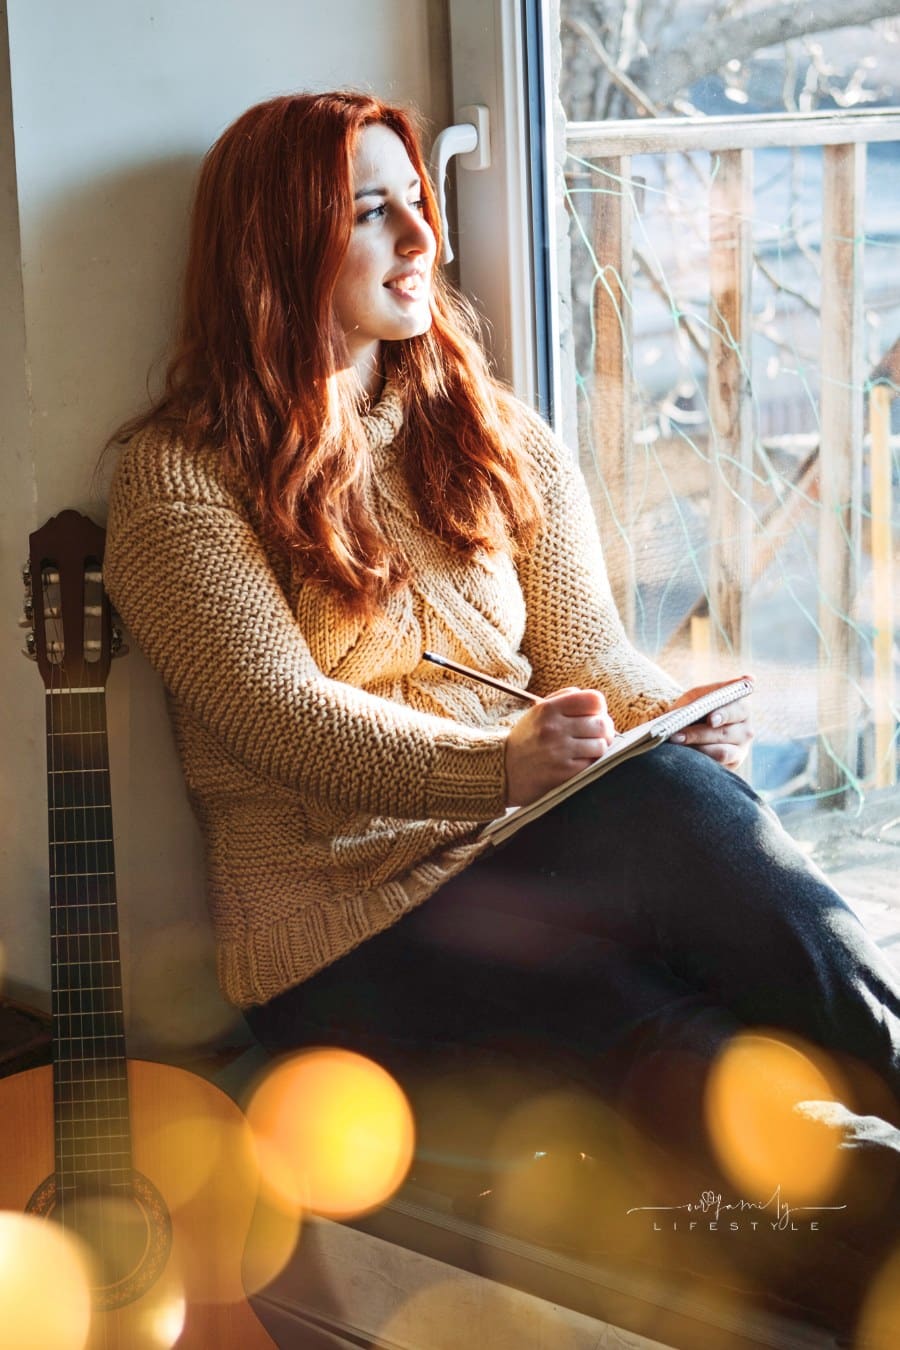 woman with red hair sitting in window, looking outside and writing in notebook with guitar nearby